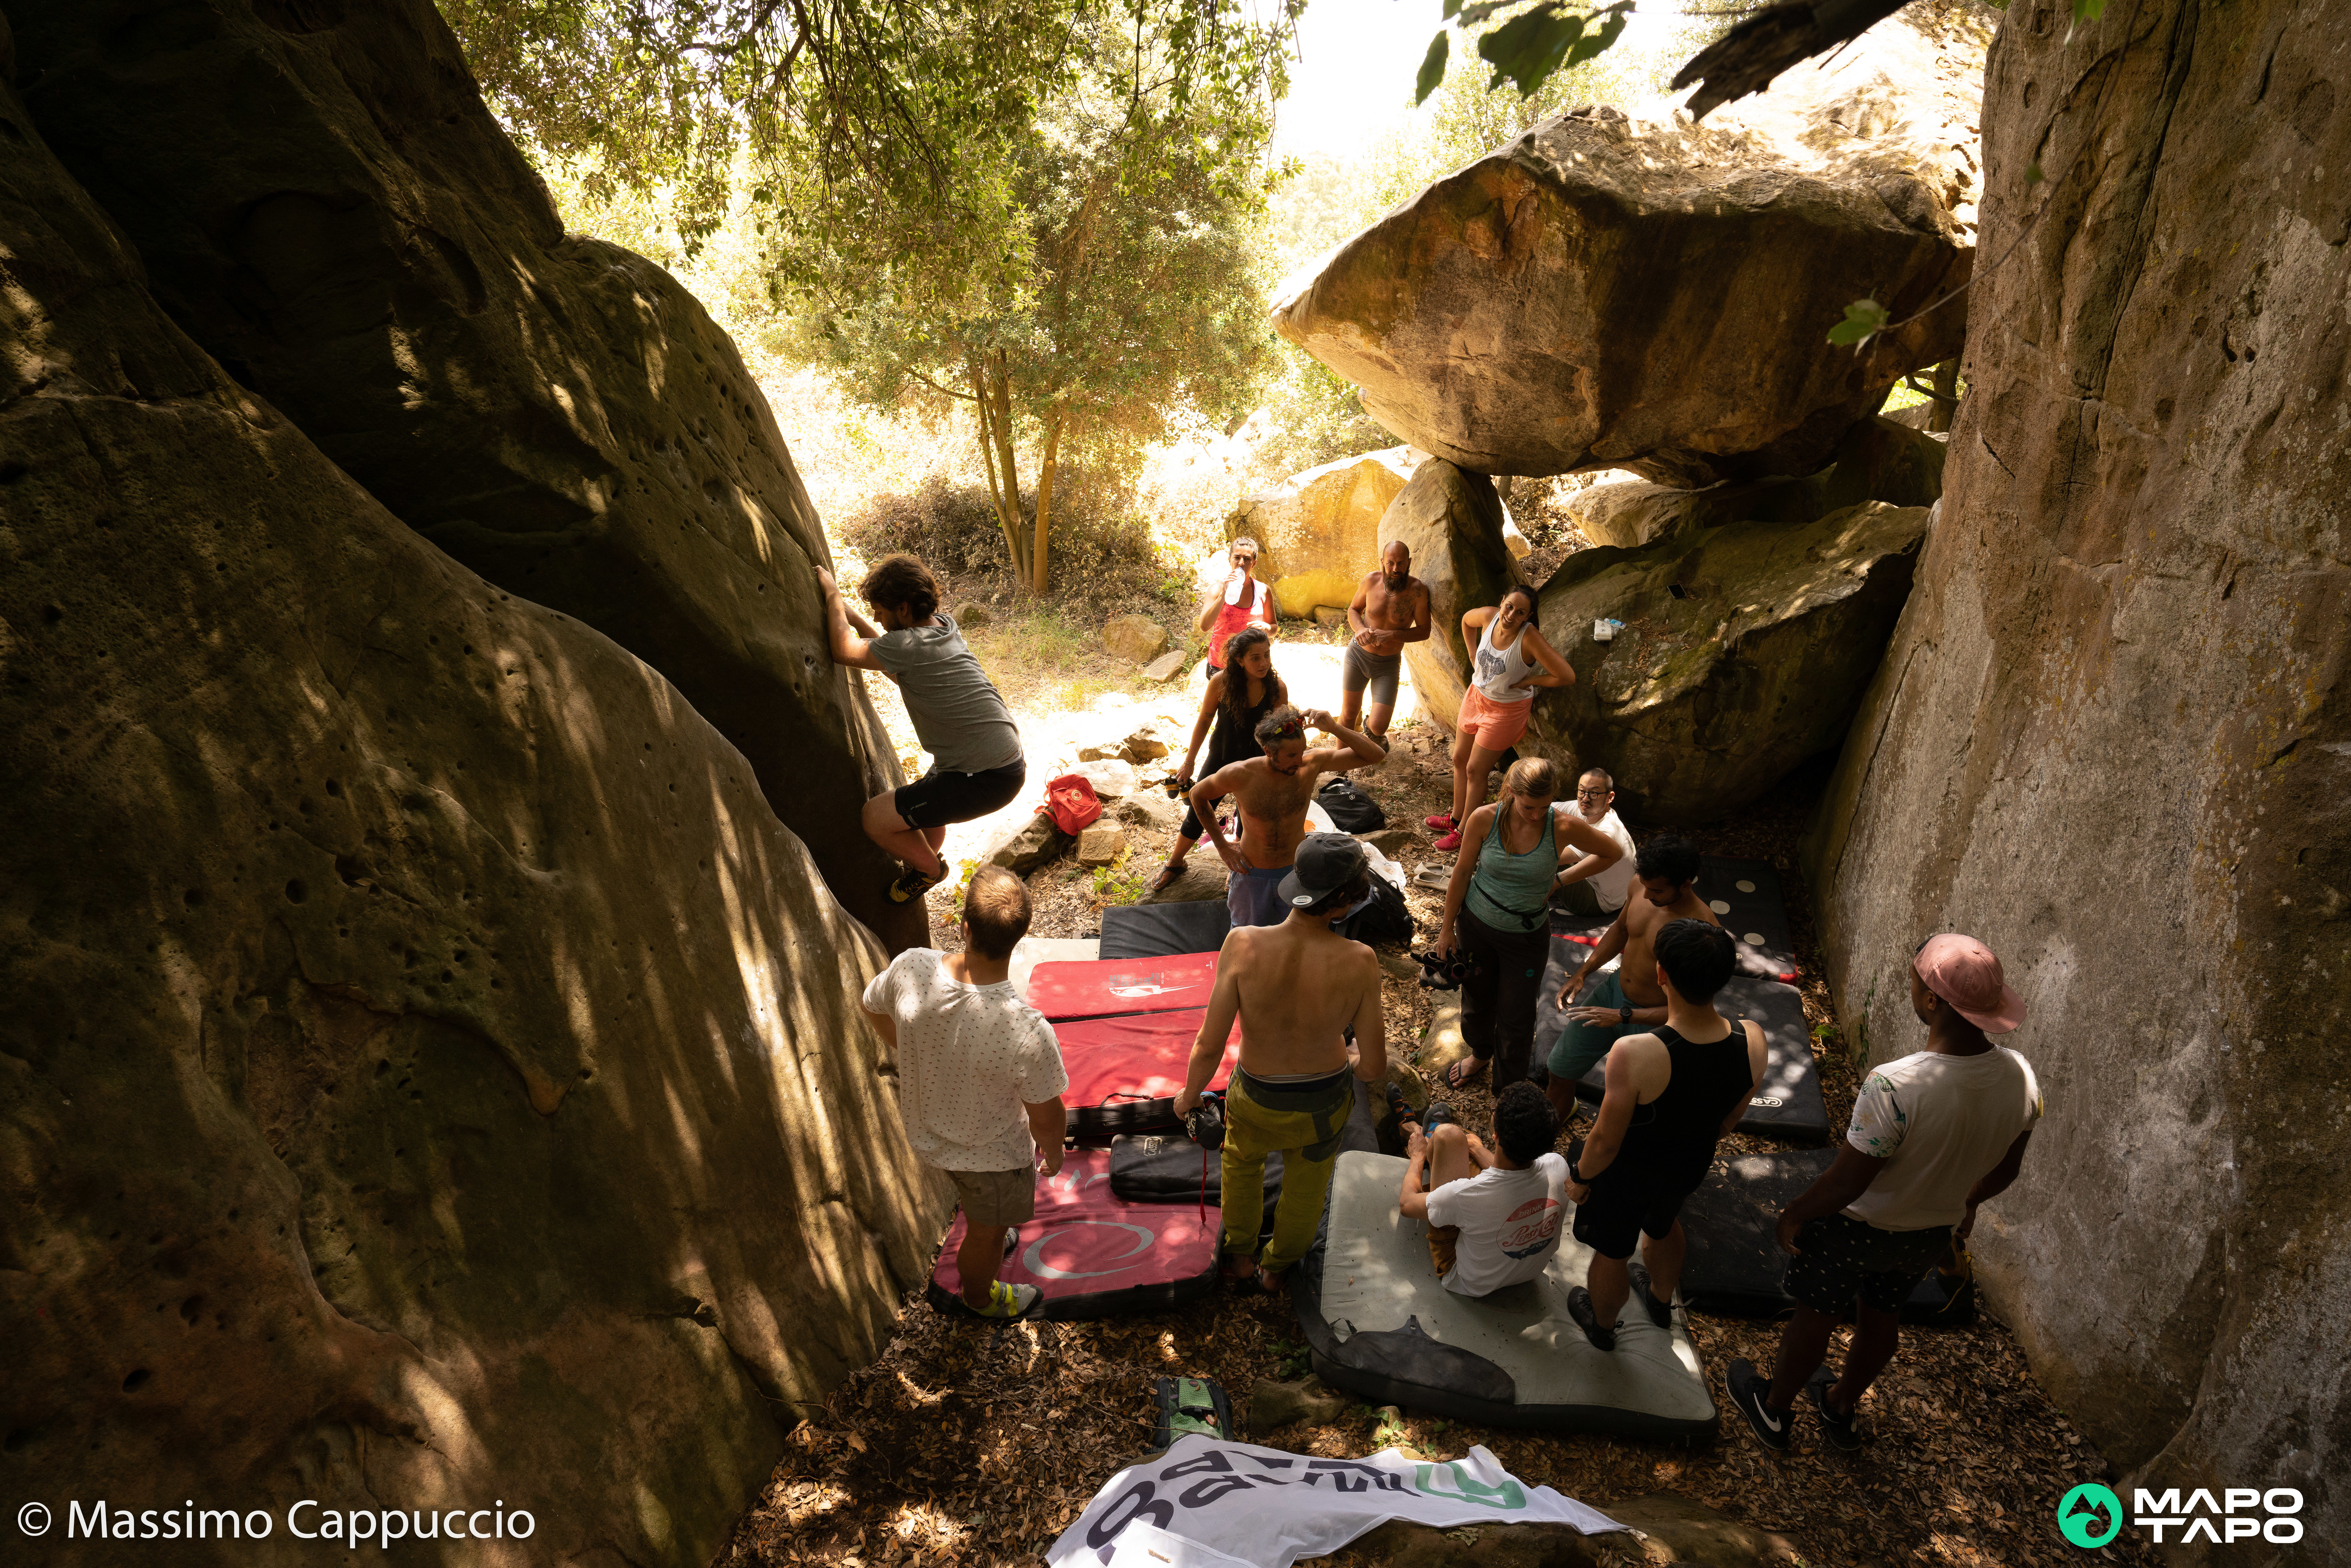 A group bouldering in Fontainebleau